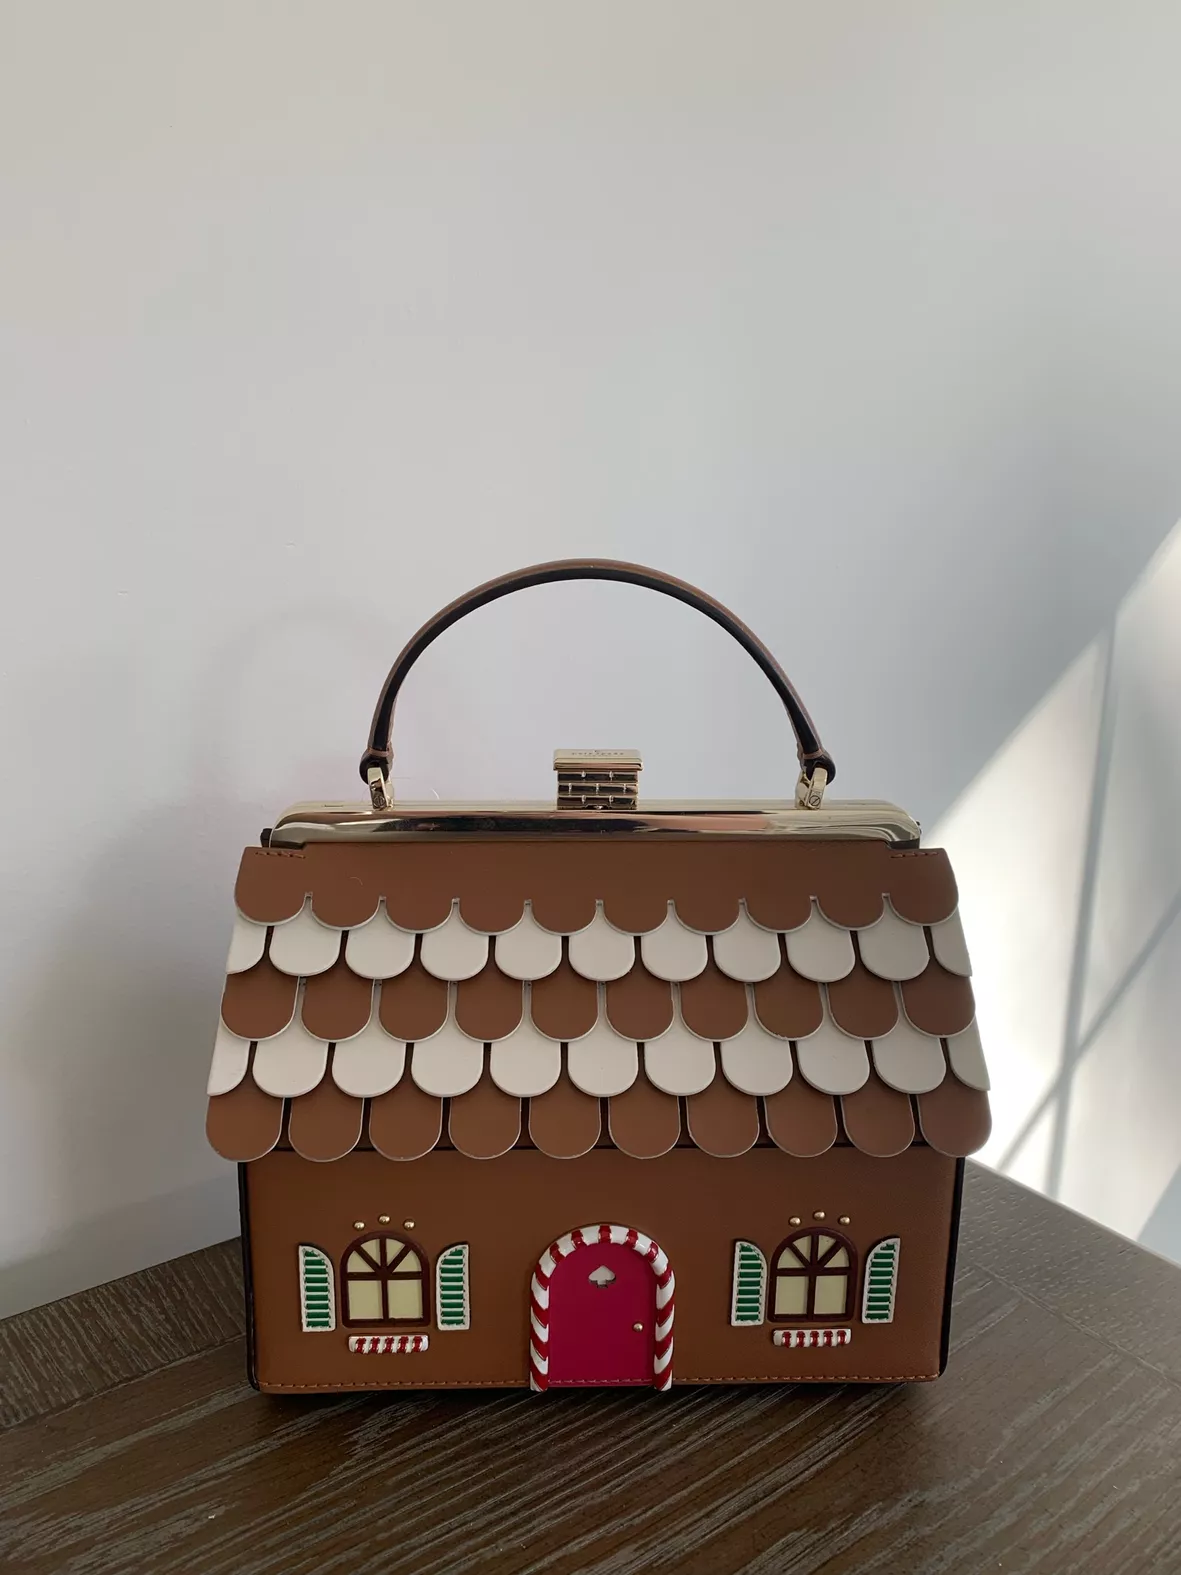 Take A Look At Kate Spade's Fun Party Bags For The Holidays - BAGAHOLICBOY